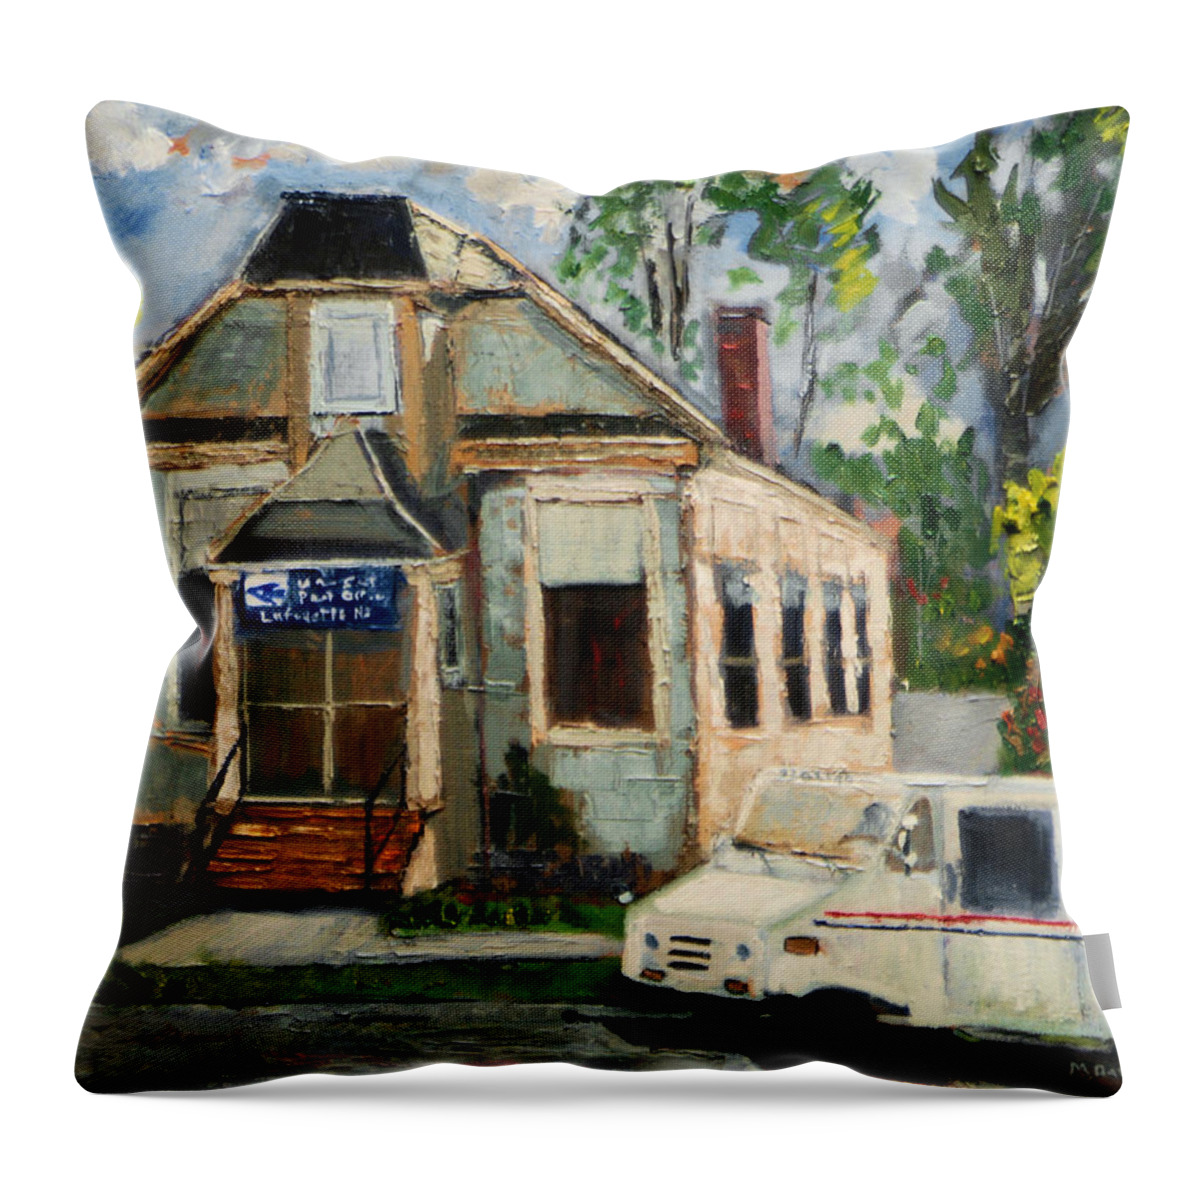 Post Throw Pillow featuring the painting Post Office at Lafeyette NJ by Michael Daniels